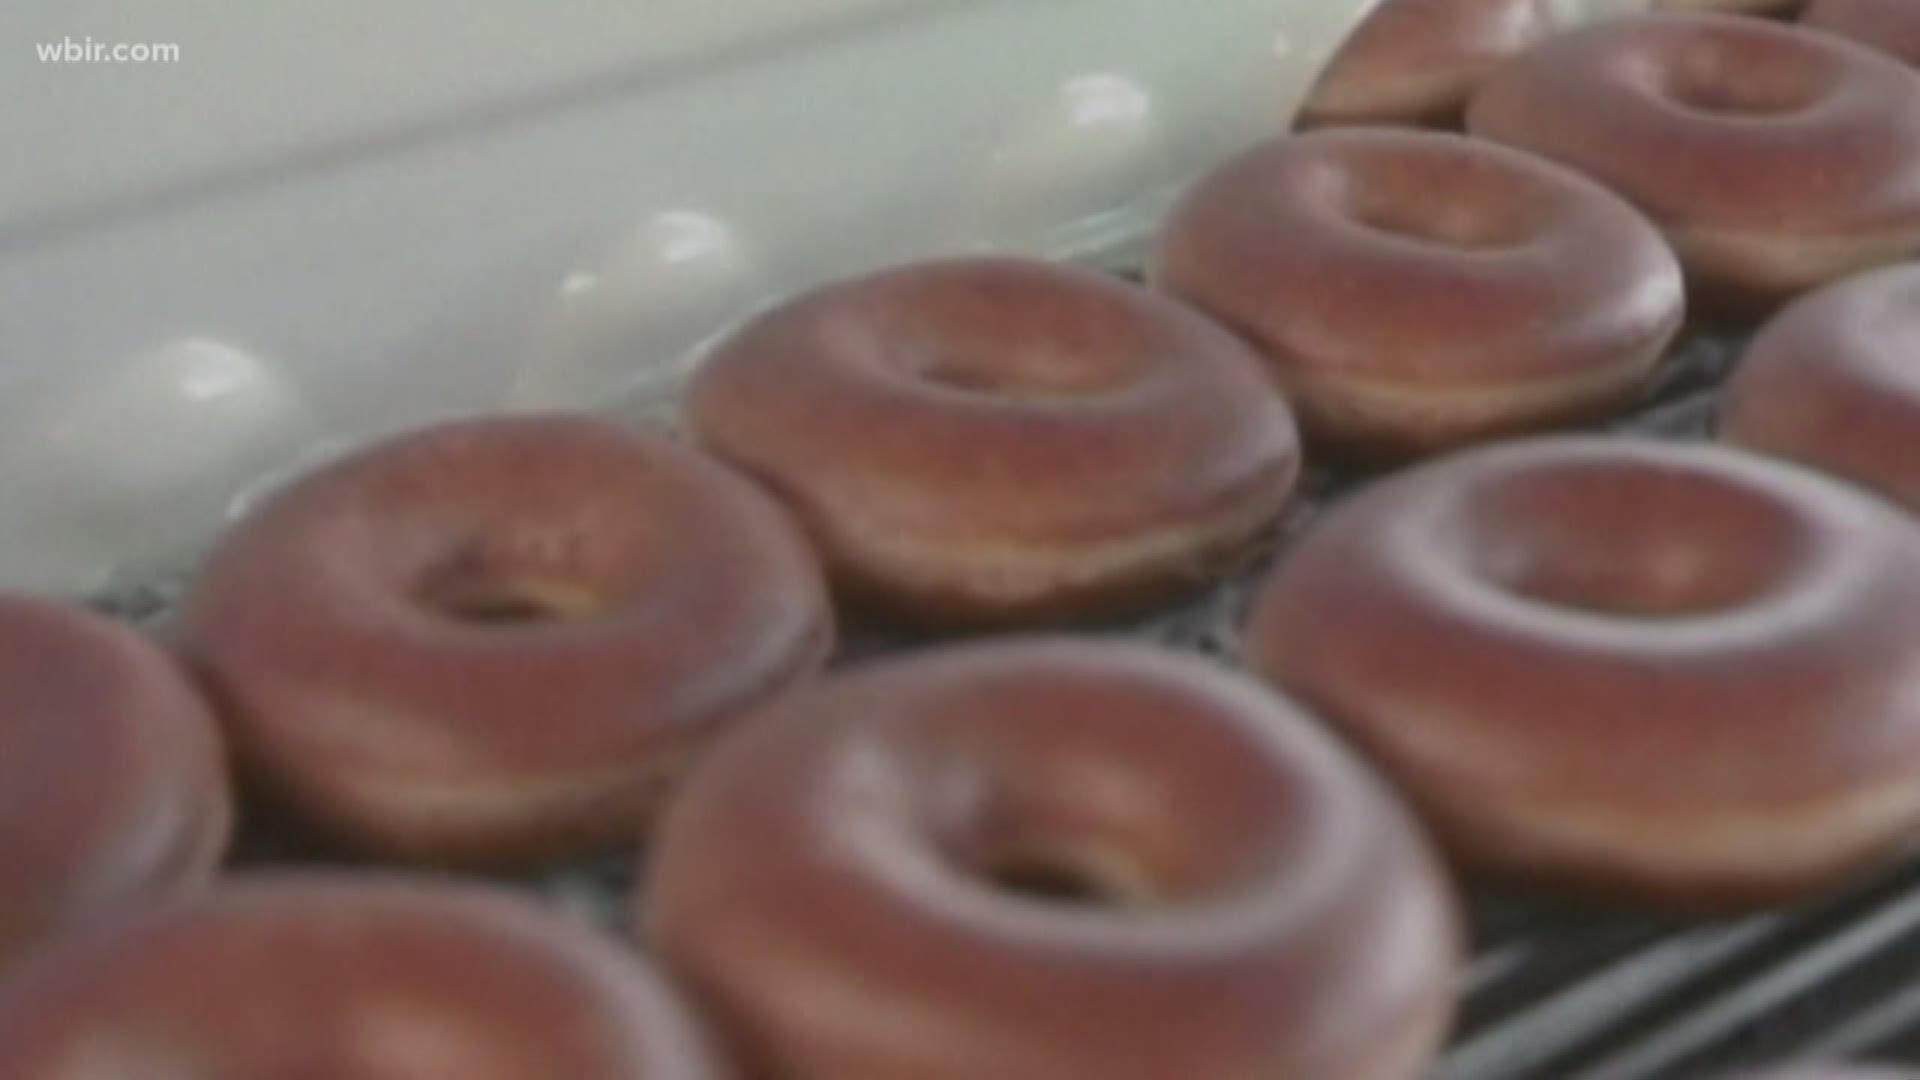 You can now get Krispy Kreme doughnuts hot, fresh and delivered straight to your door!